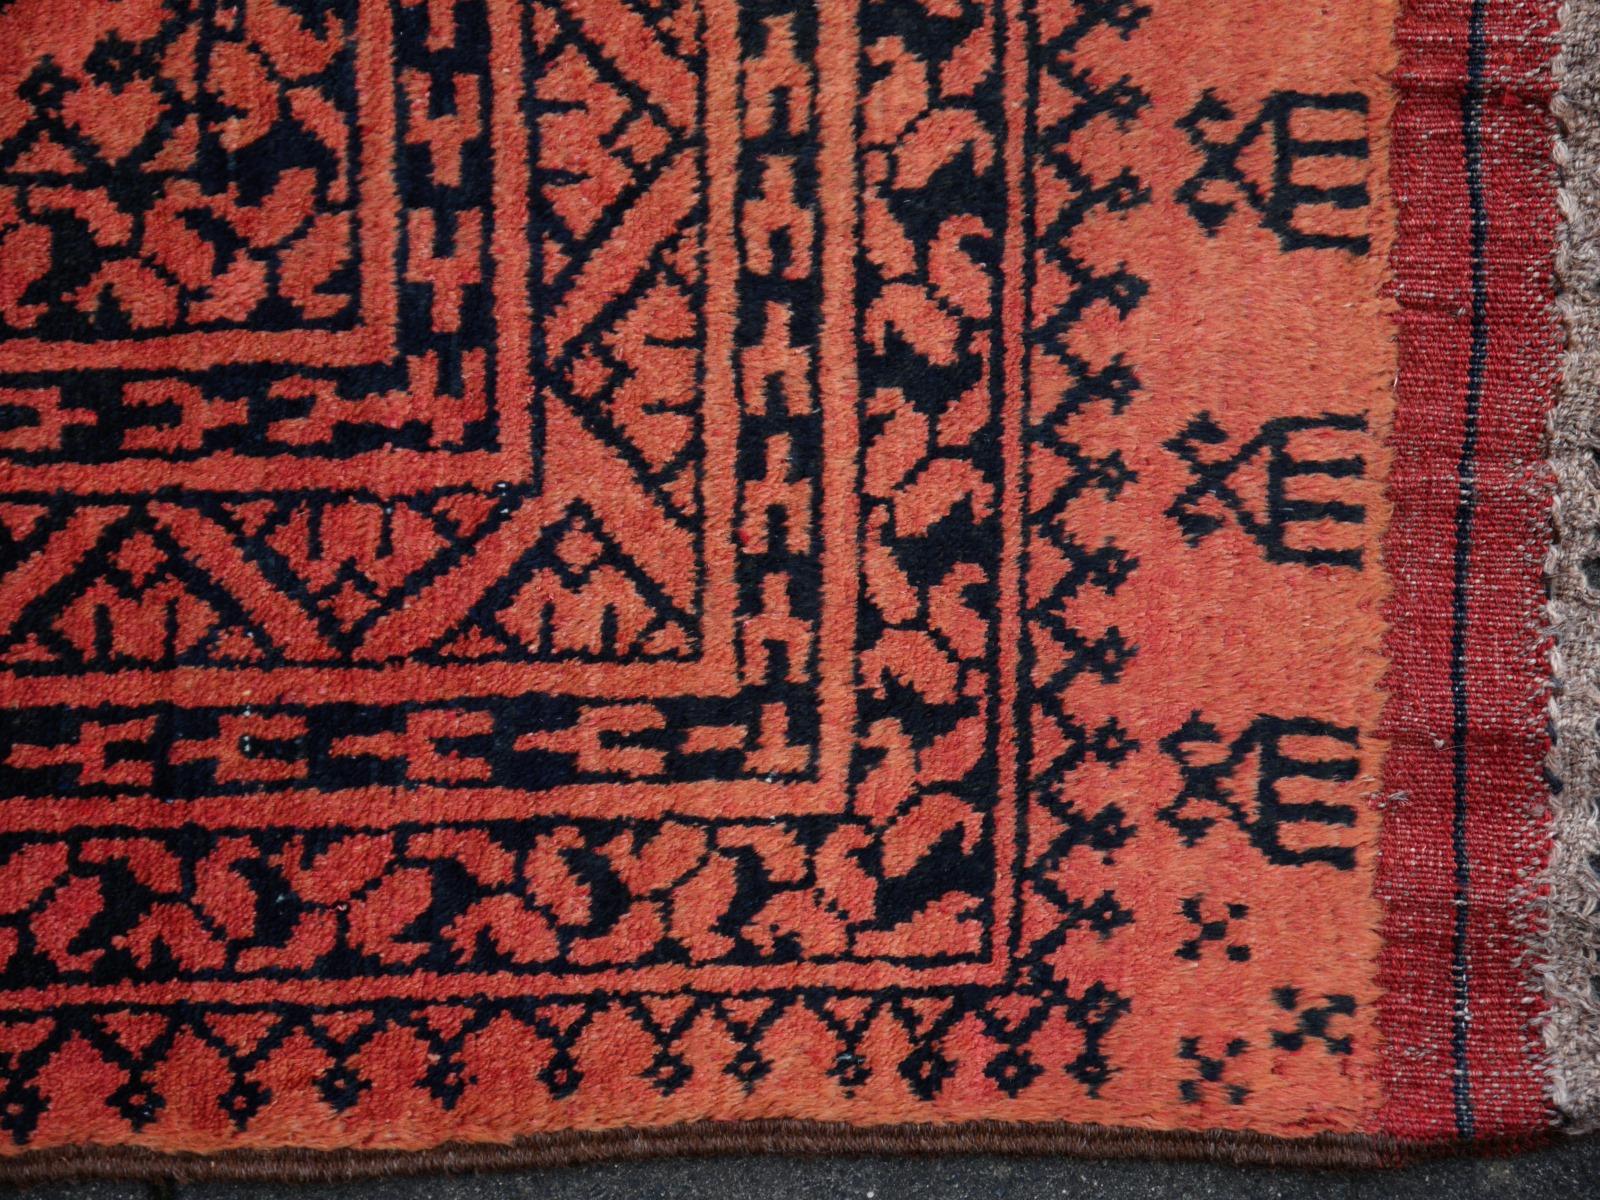 Large sized tribal rug Afghan Ersari Turkoman or Turkmen rug

The Turkmen or Turkoman people are settling in villages in Afghanistan an Turkmenistan near the Persian border. Their origin is tribal nomadic, but most members of the tribes have